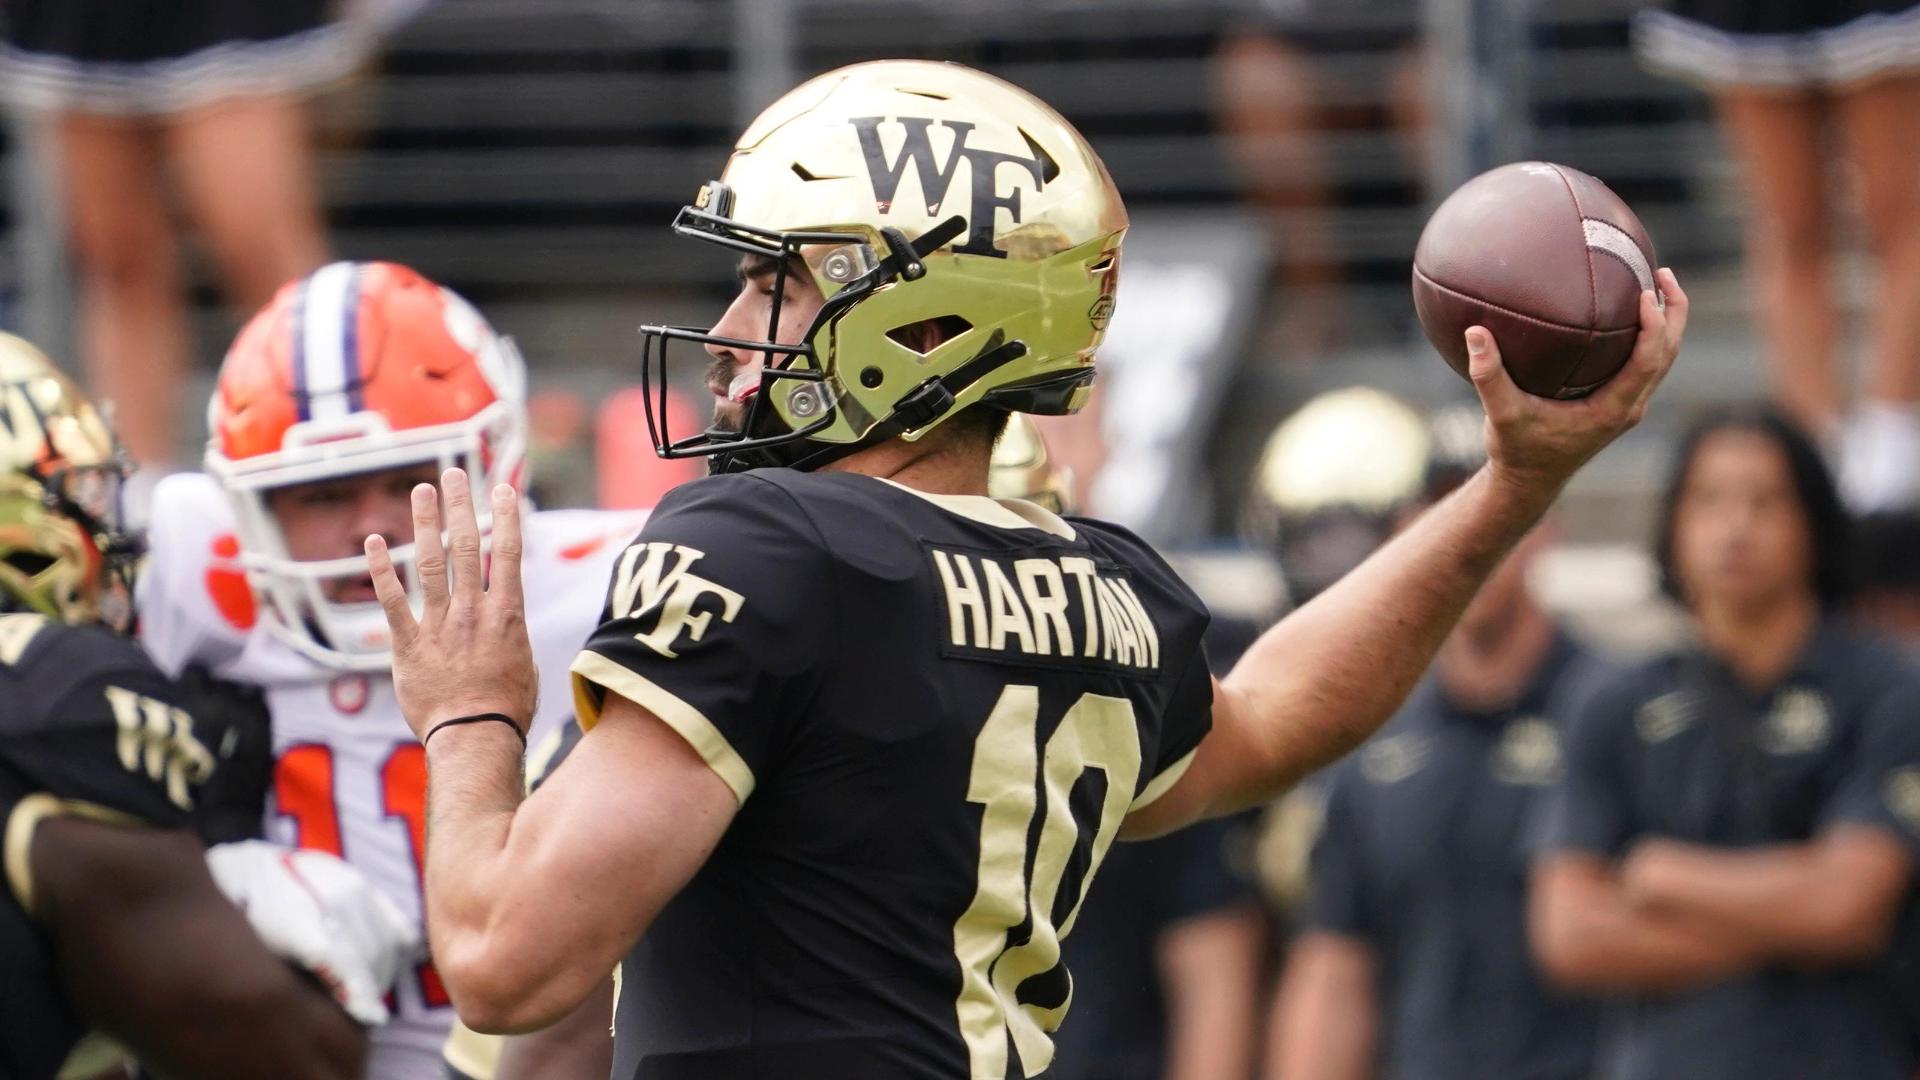 Hartman sets single-game Wake Forest record with TD pass in overtime